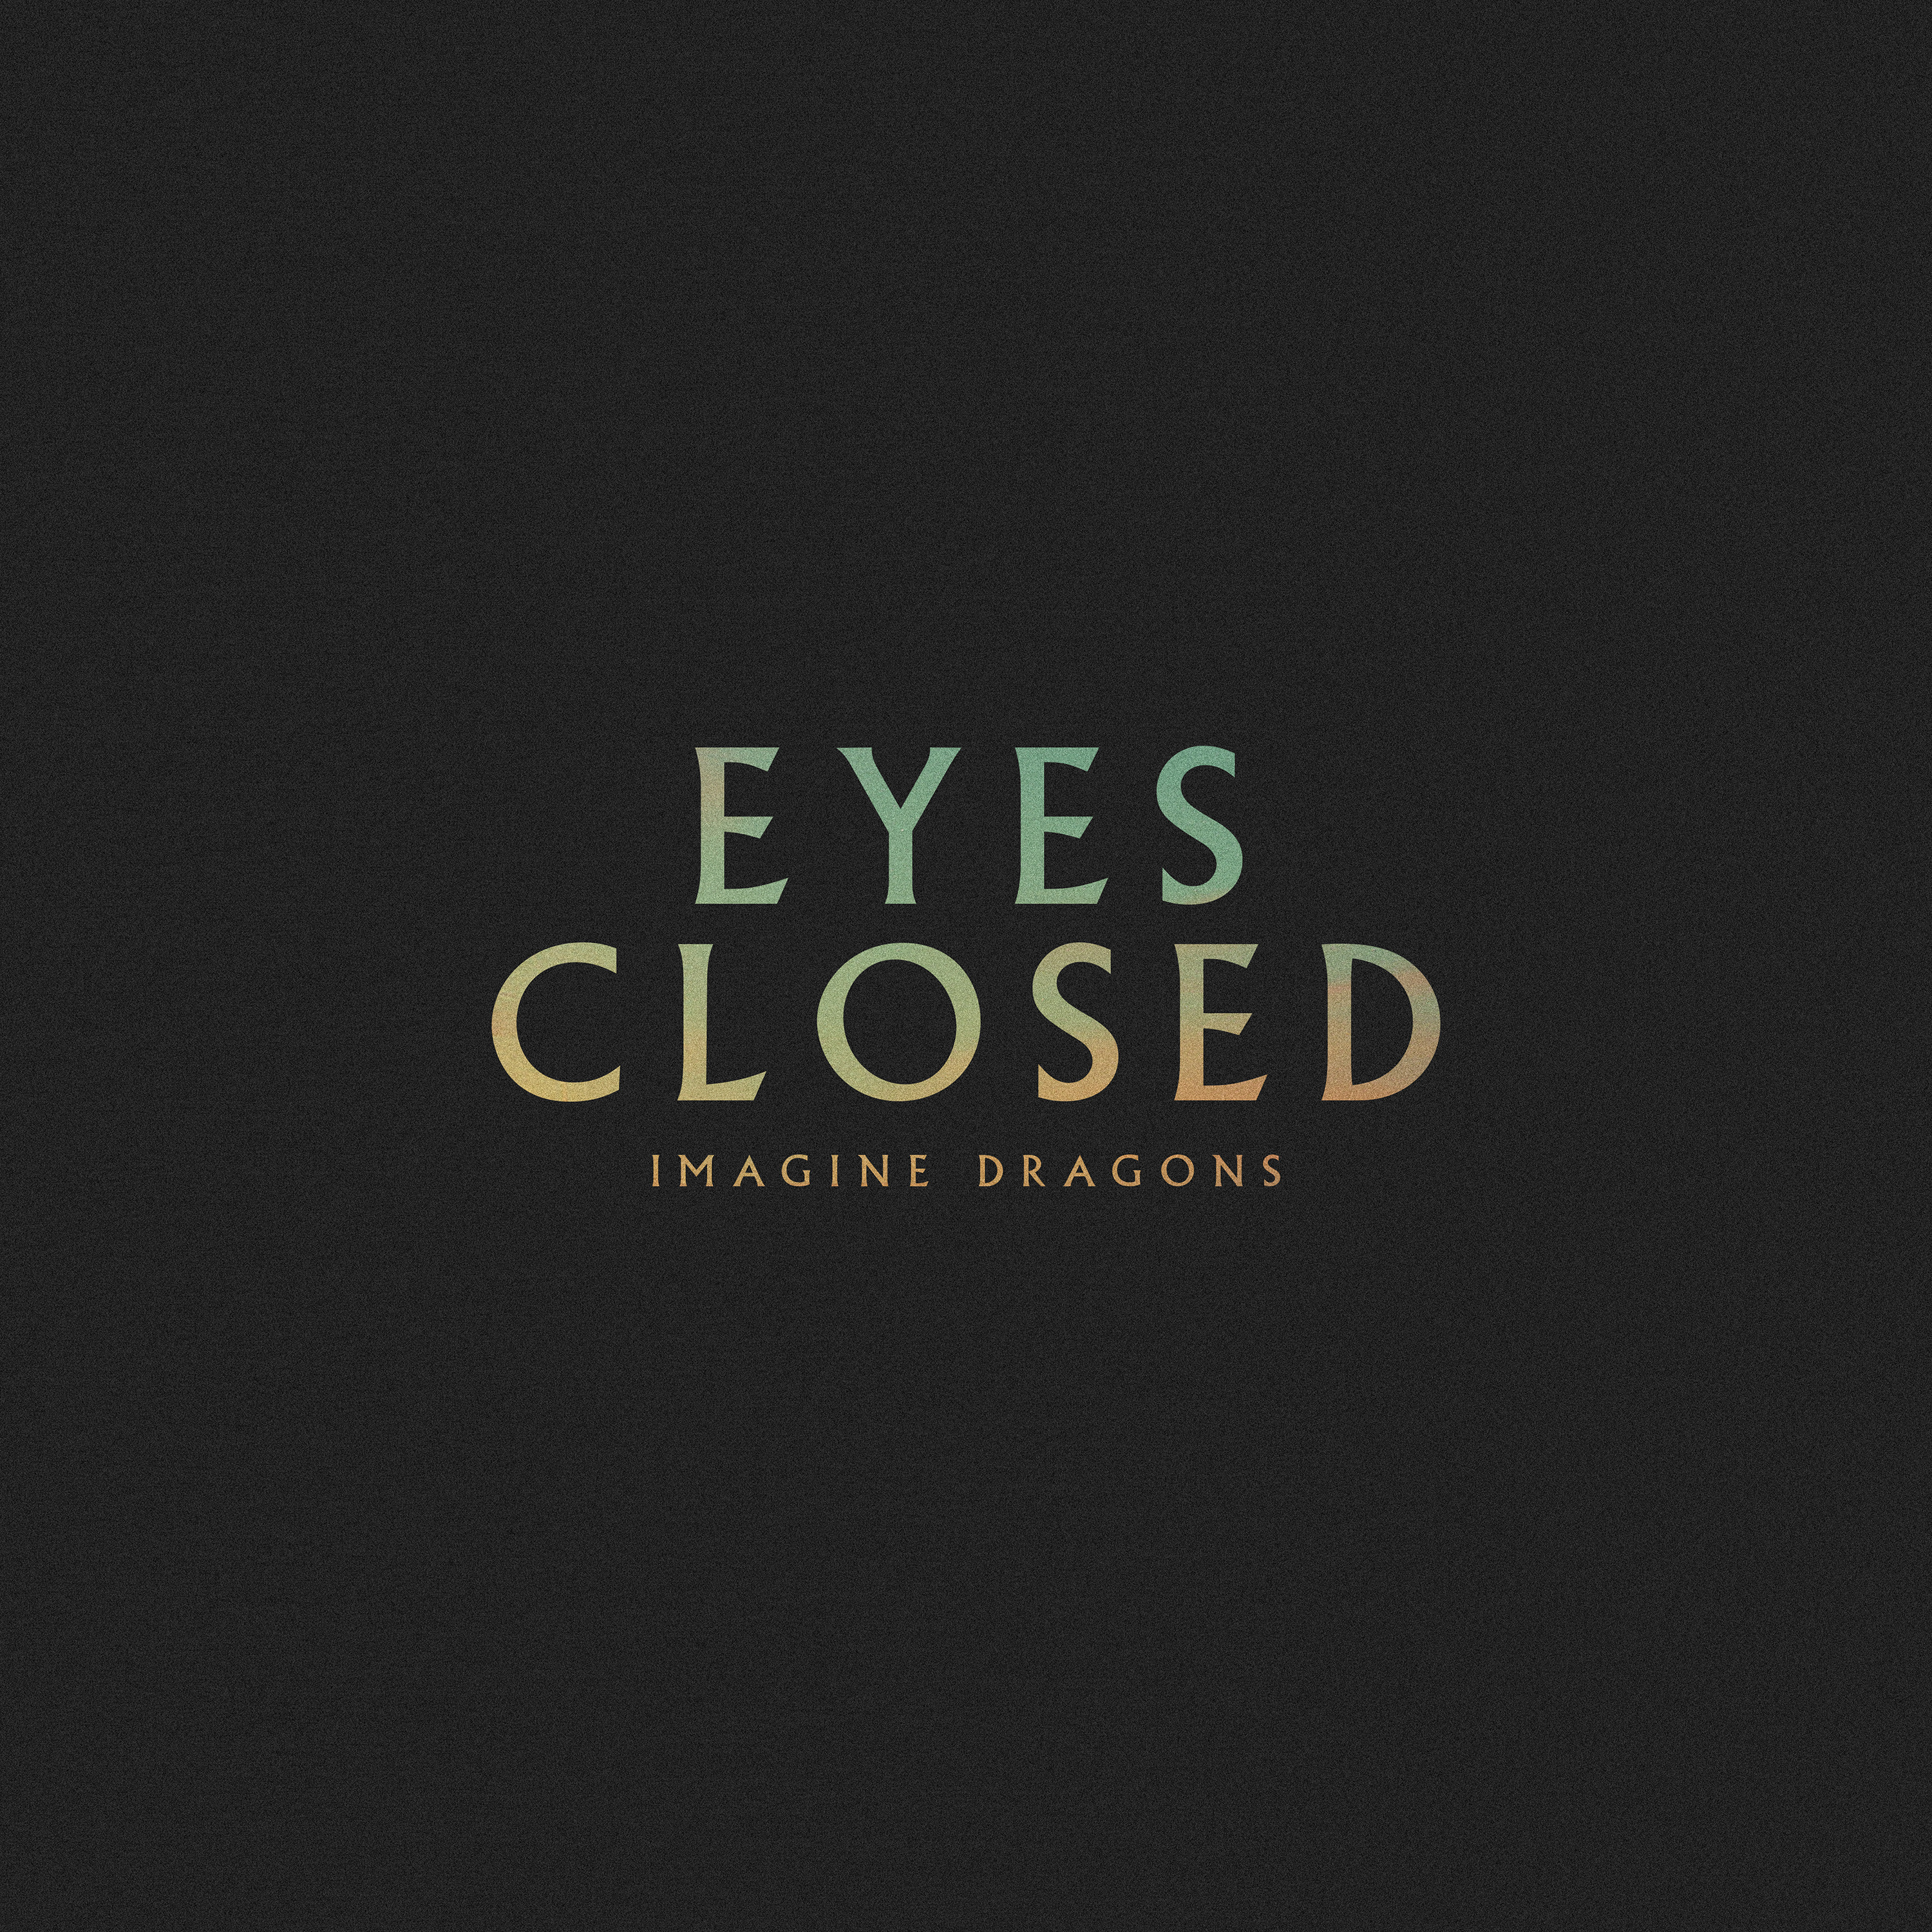 Analyzing Eyes Closed by Imagine Dragons: A Journey Through Resilience and Rebirth